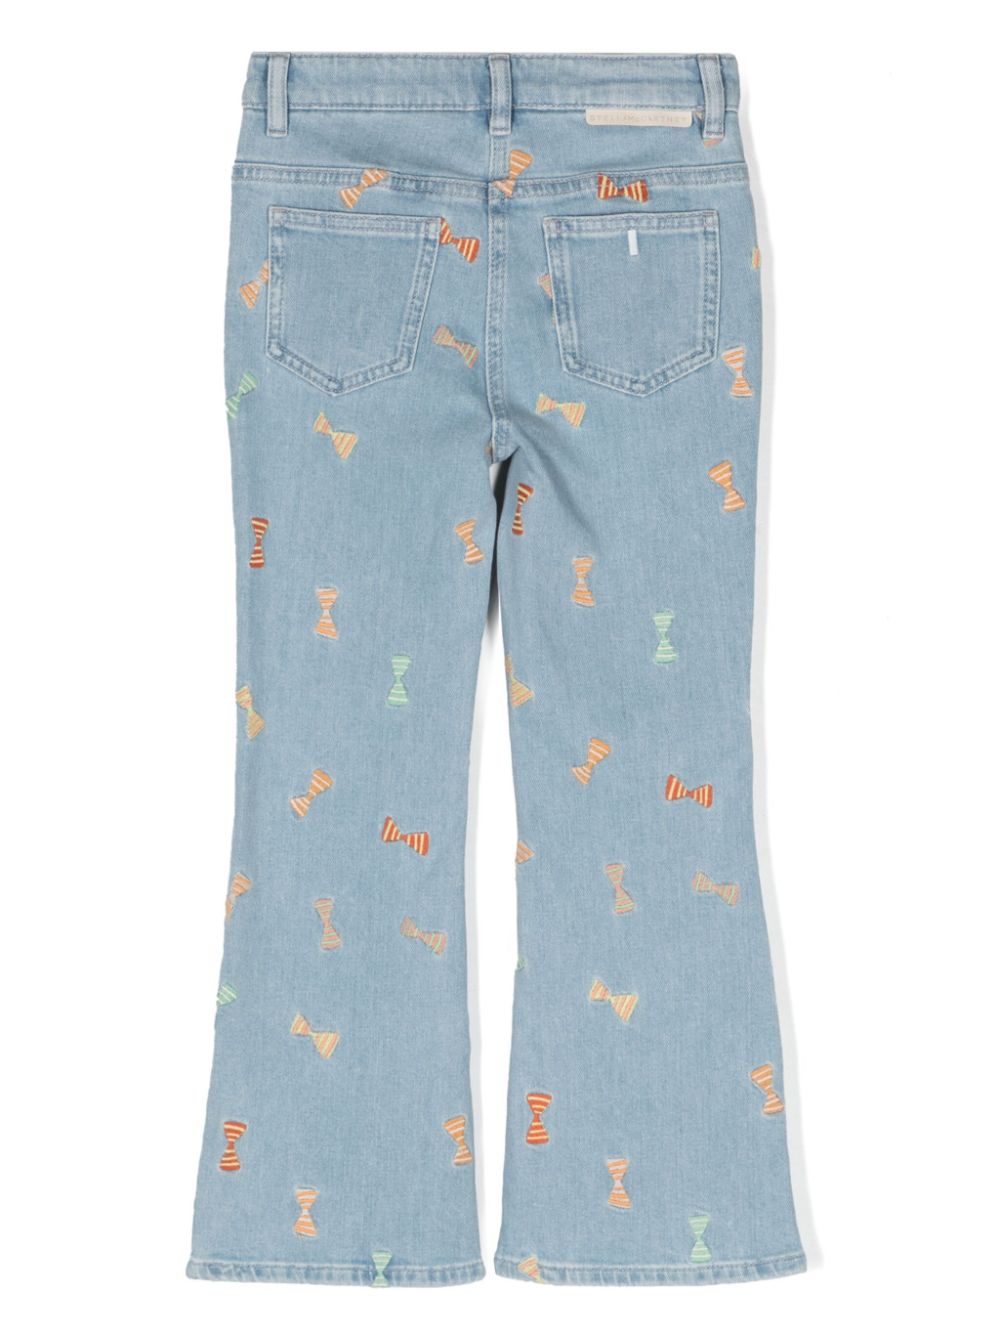 Light blue jeans for girls with embroidered bows